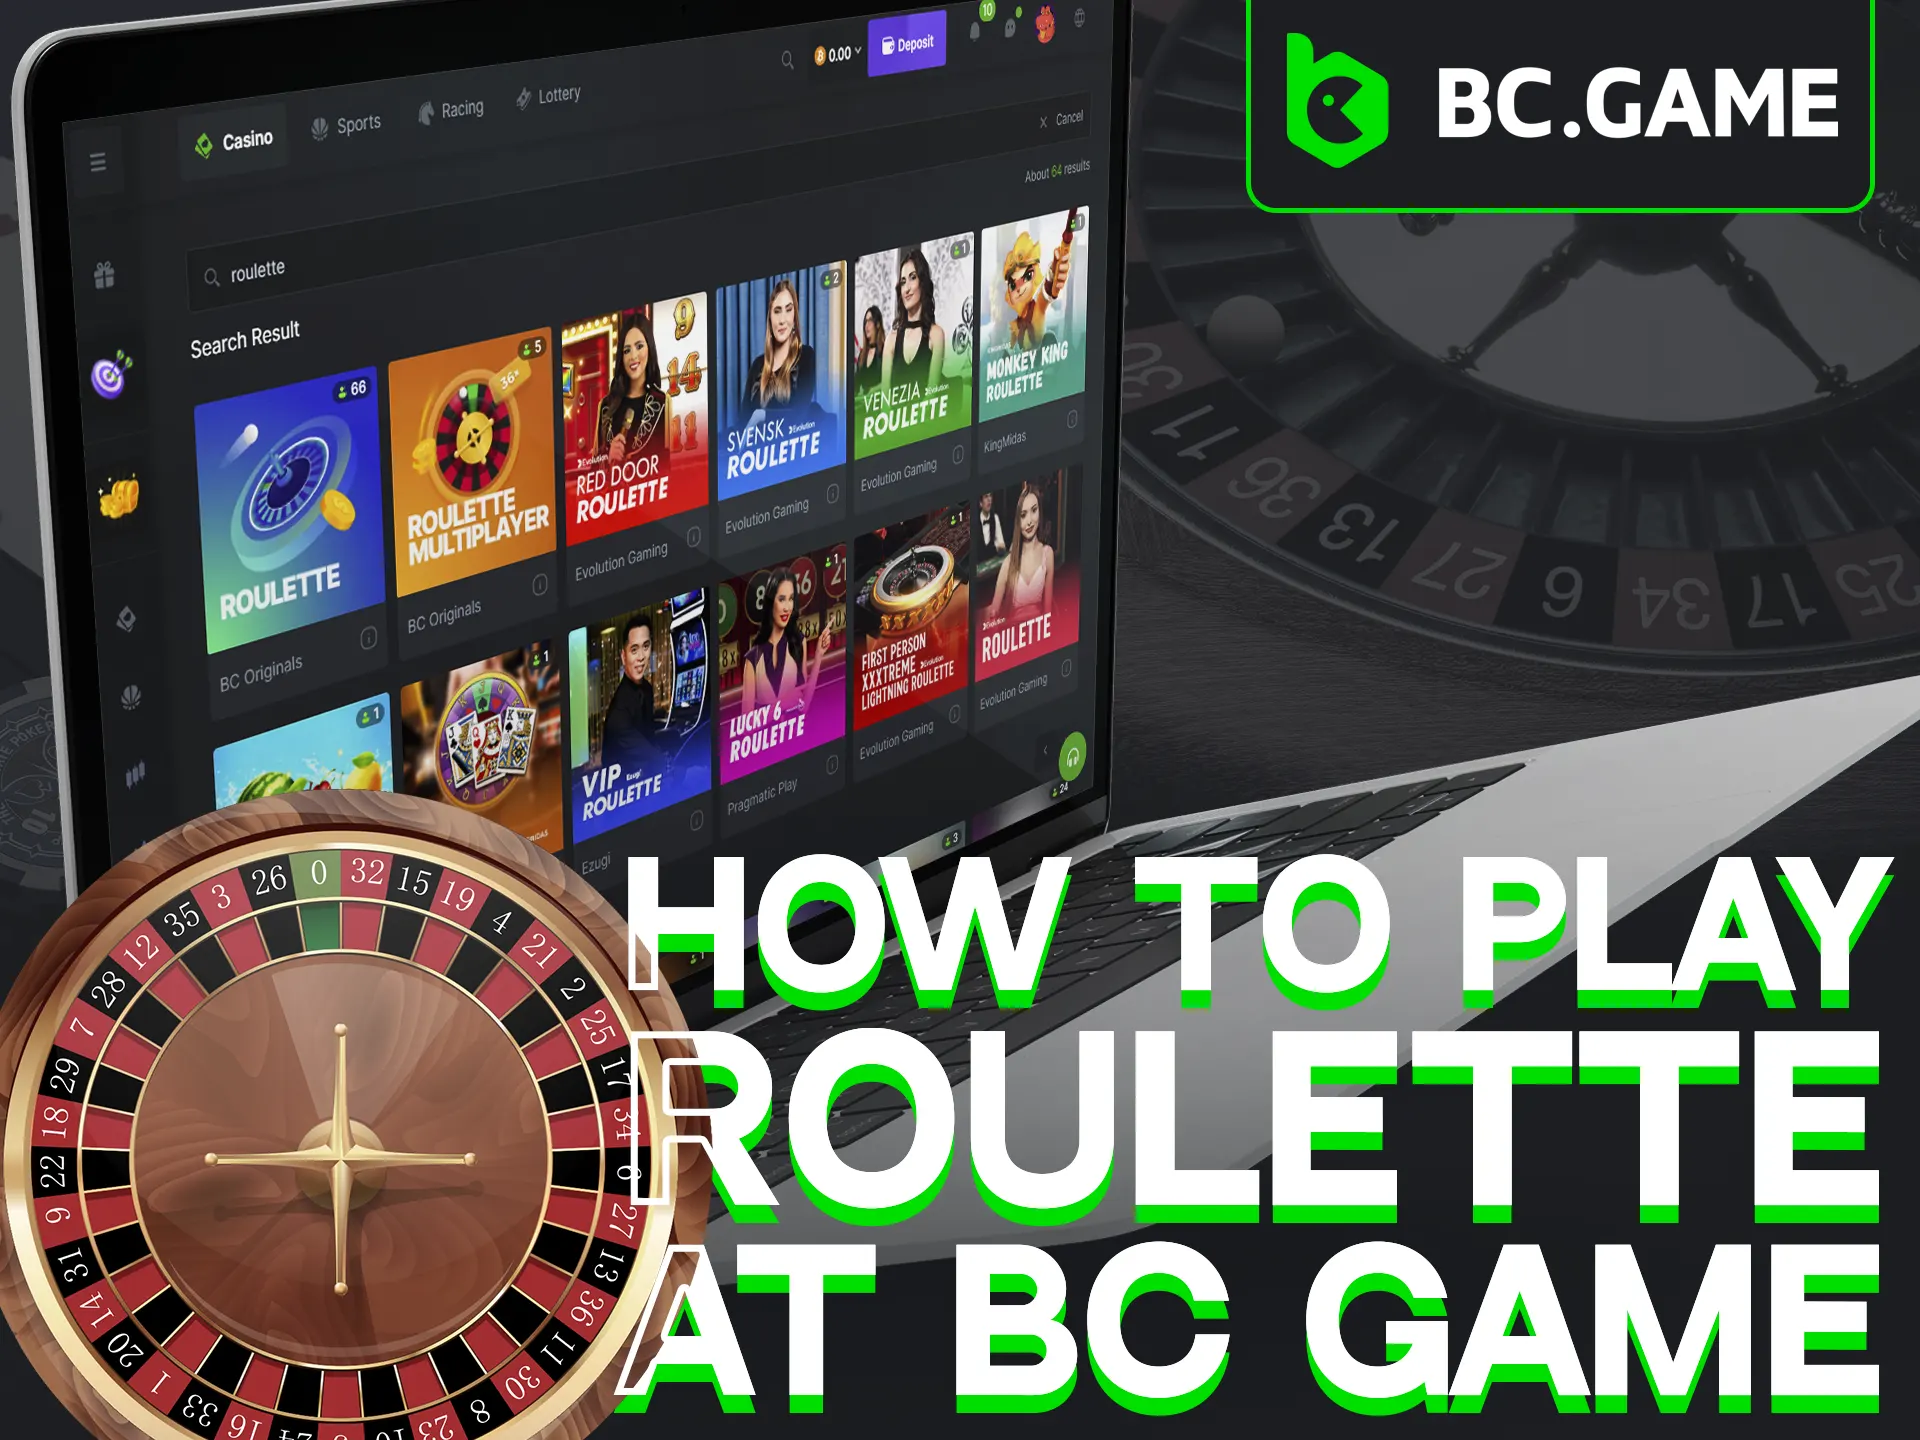 Enjoy roulette at BC Game, Pakistan's top casino.